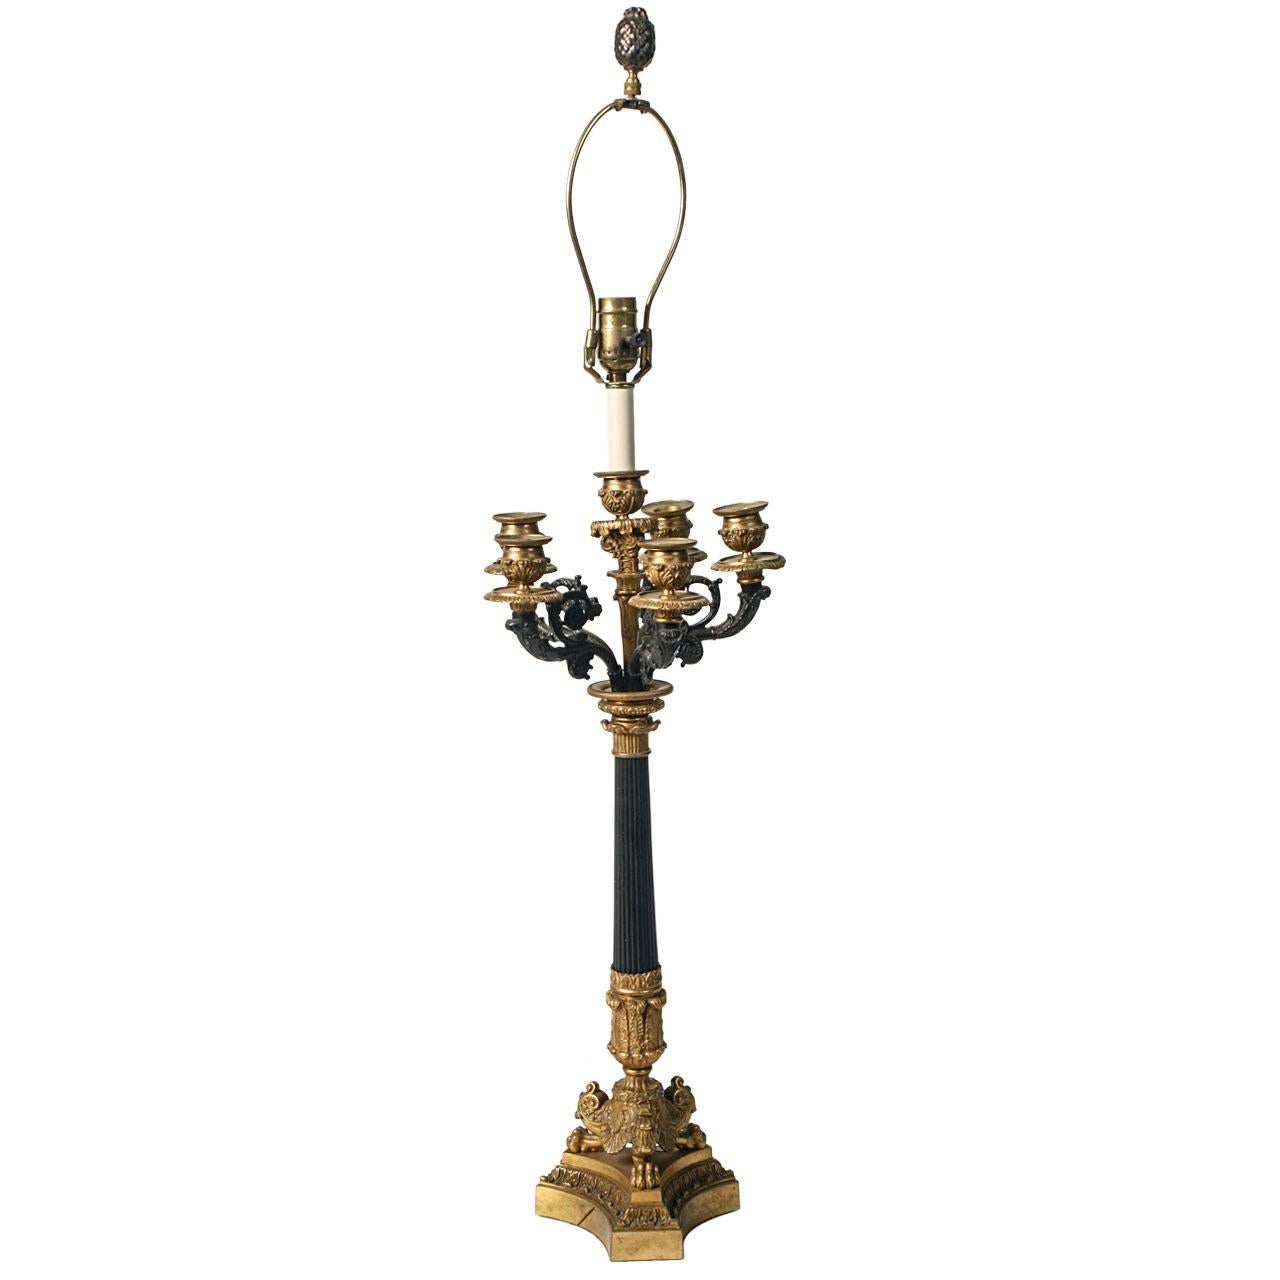 19th Century French Bronze 5 Arm Candelabra Lamp For Sale